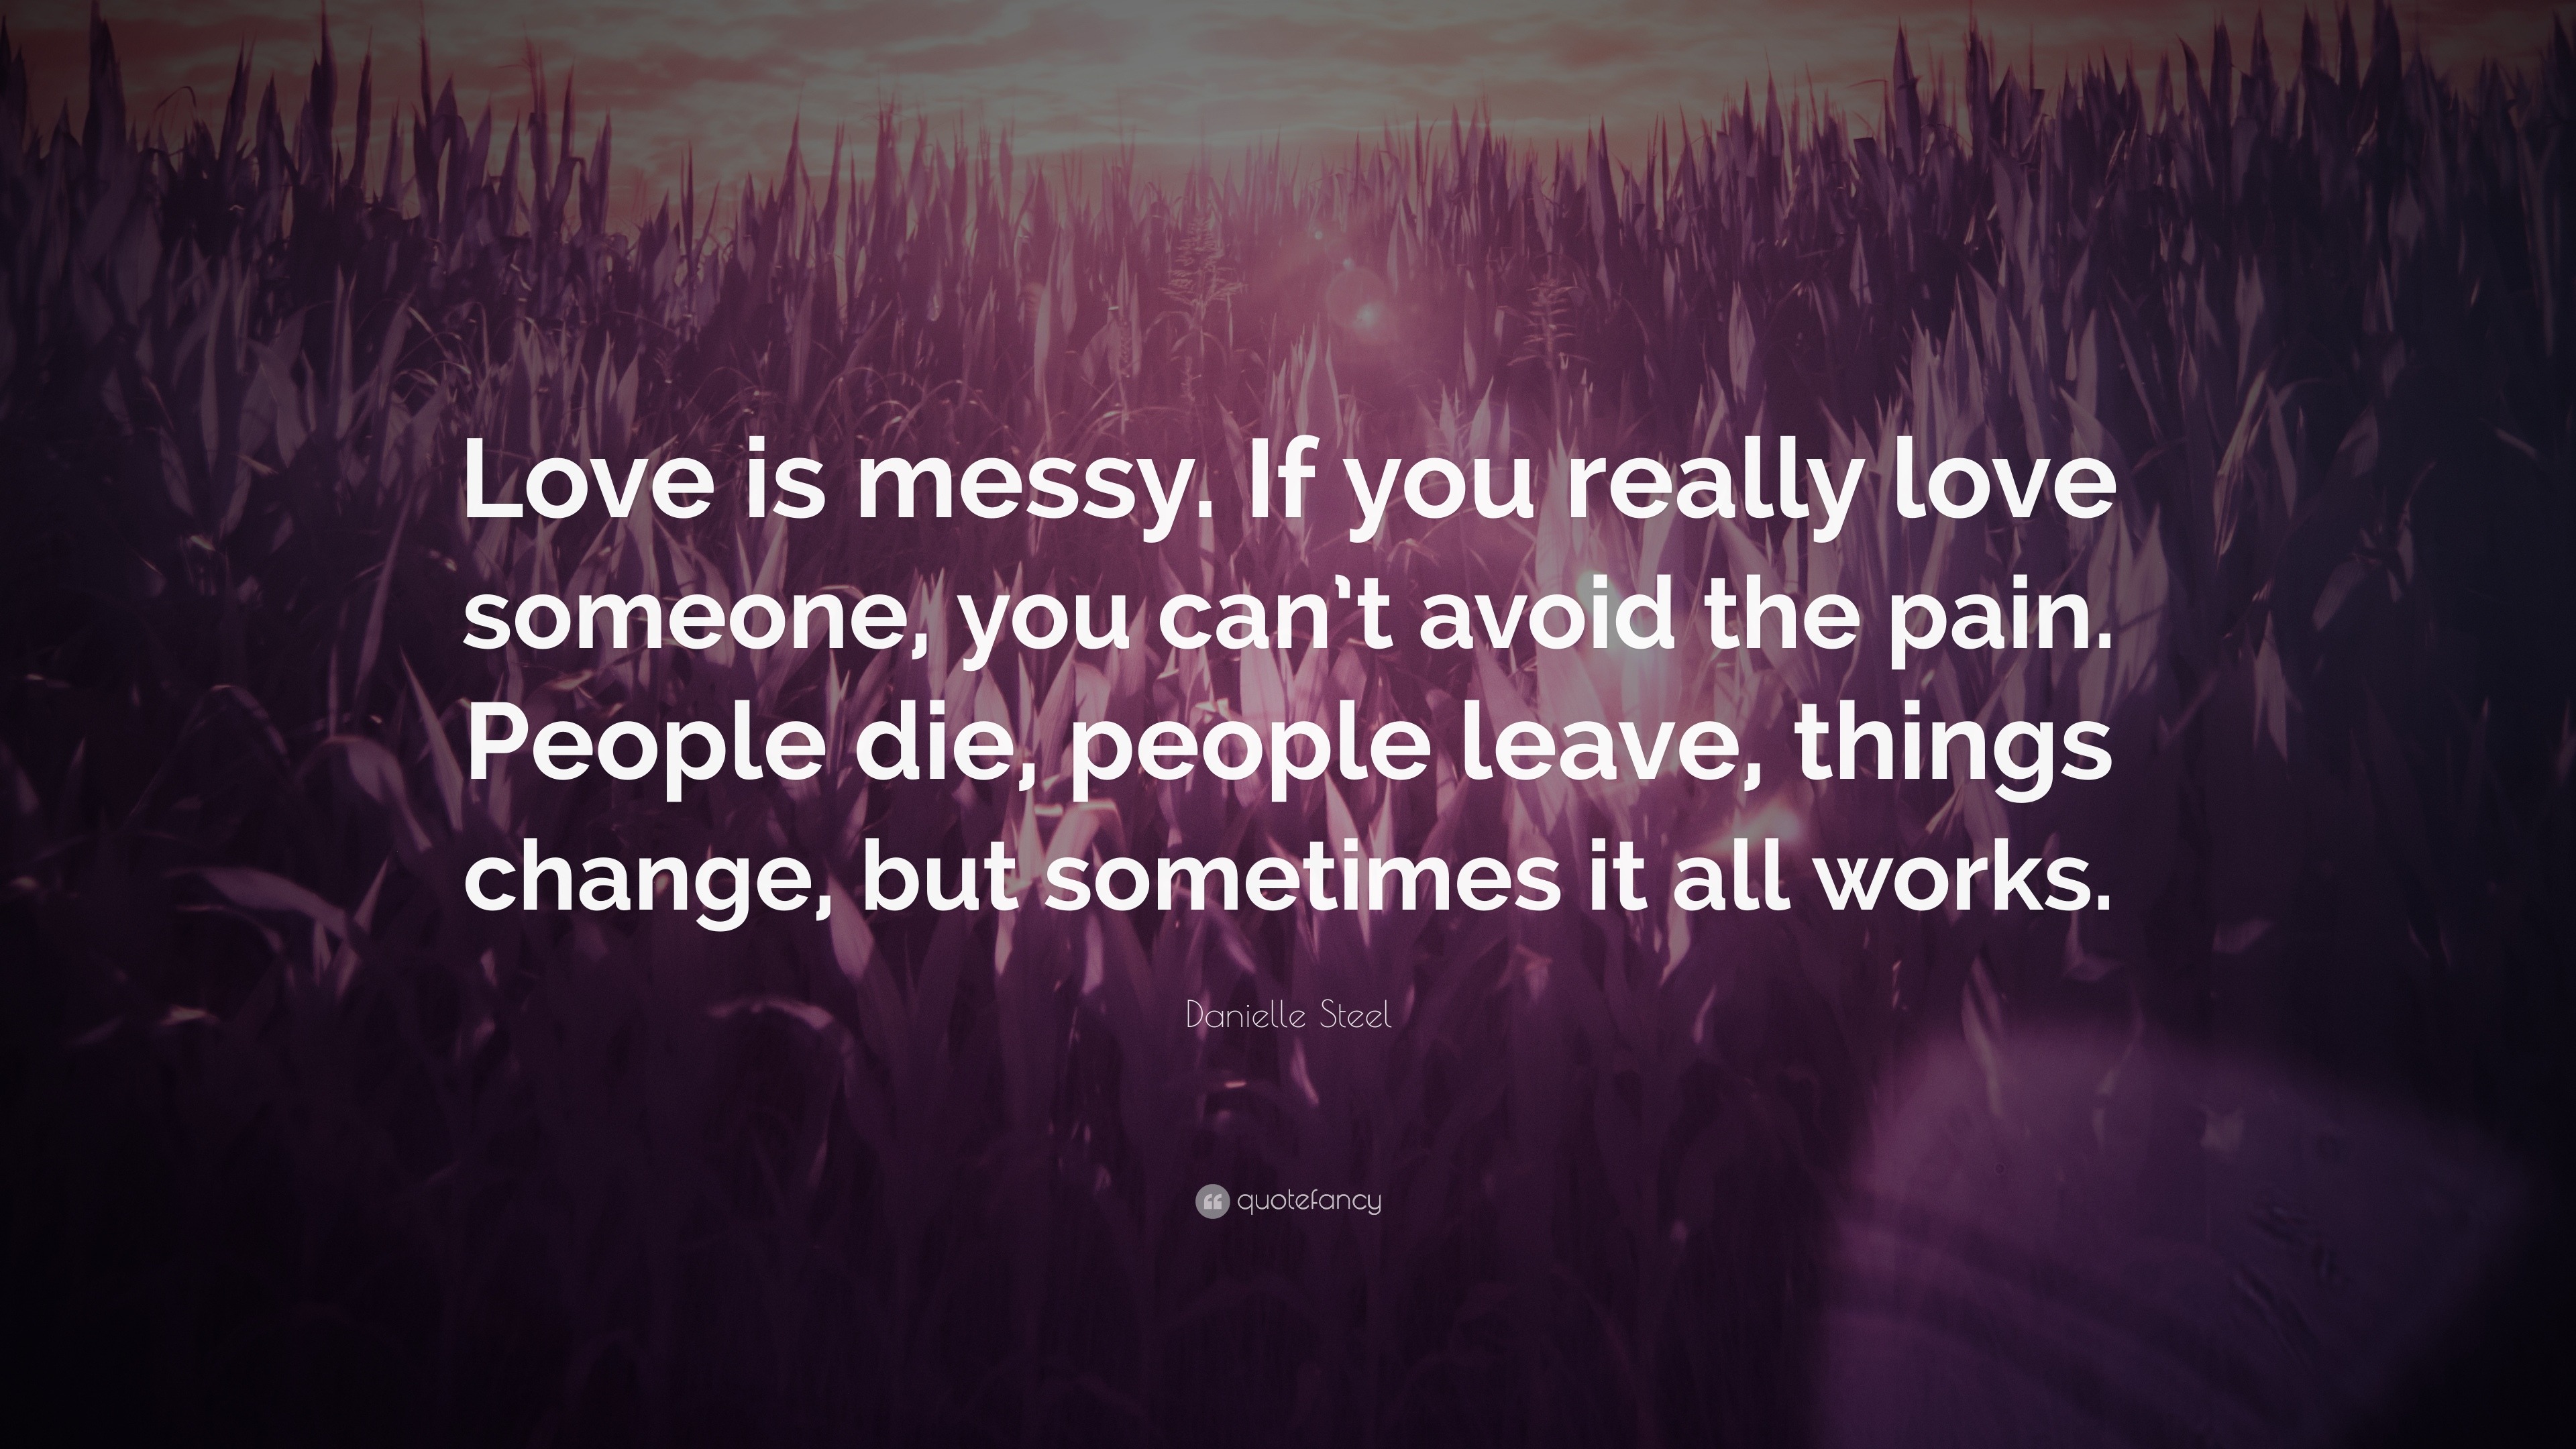 Danielle Steel Quote “Love is messy If you really love someone you